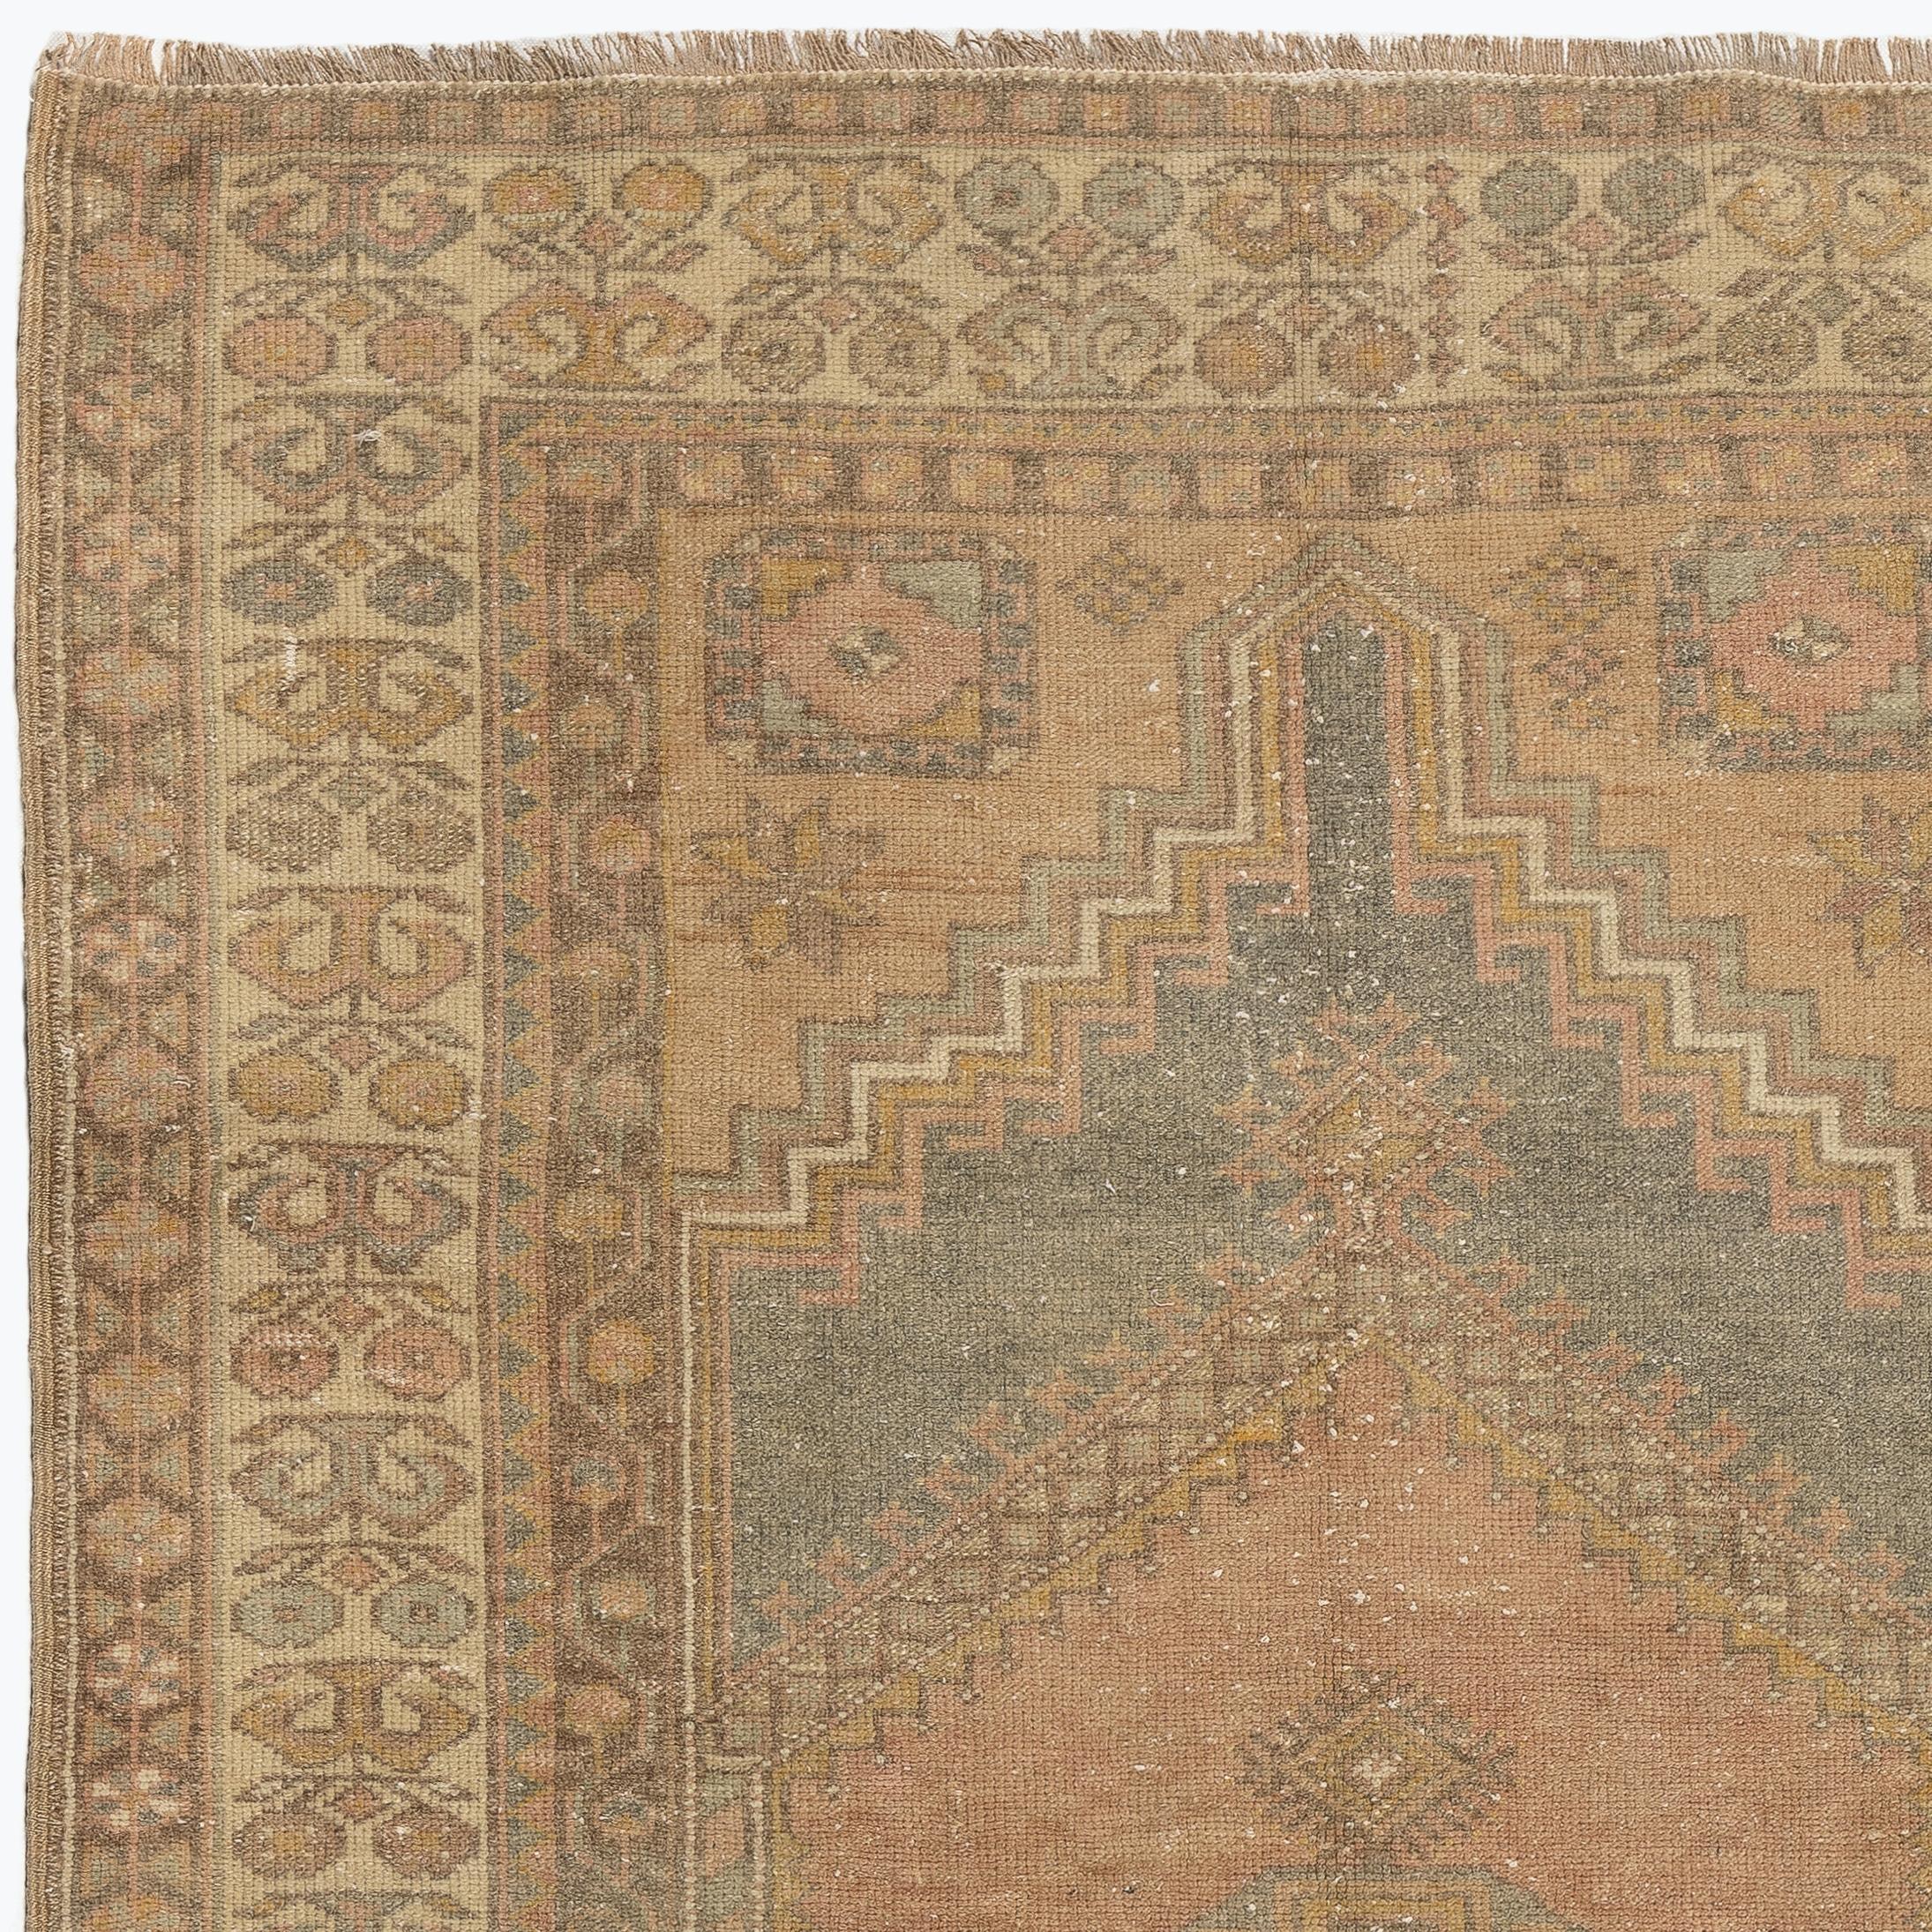 A finely hand knotted vintage Turkish carpet from 1950s featuring a geometric medallion design. The rug has even low wool pile on cotton foundation. It is heavy and lays flat on the floor, in very good condition with no issues. It has been washed